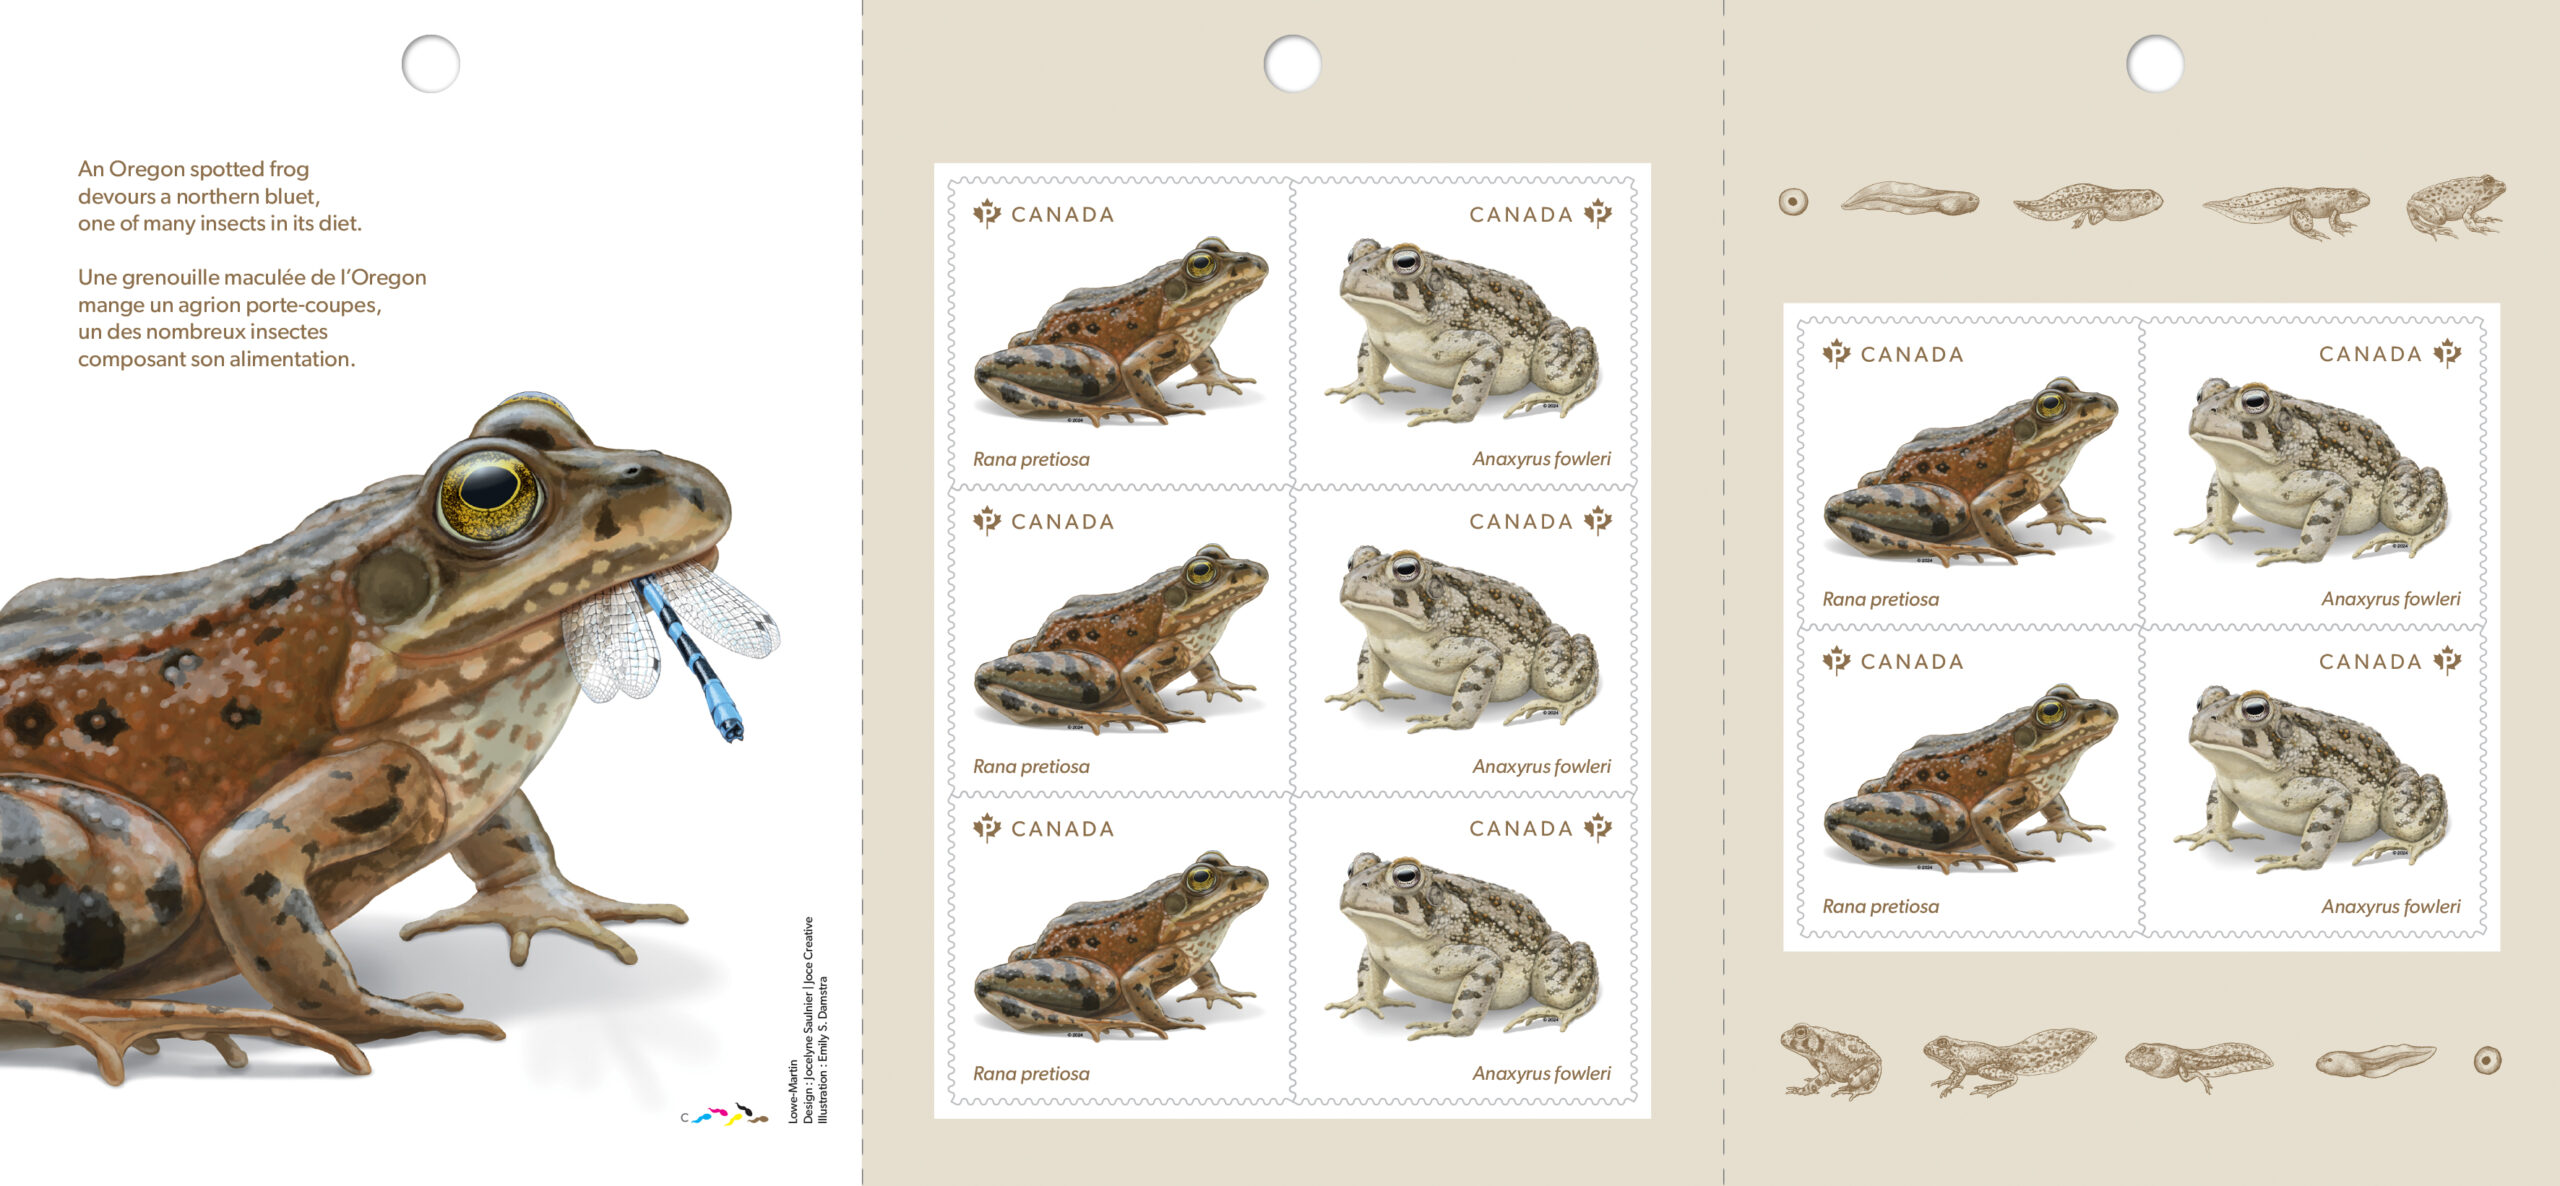 Stamp booklet pages featuring illustration of Oregon Spotted Frog eating damselfly, and stamps